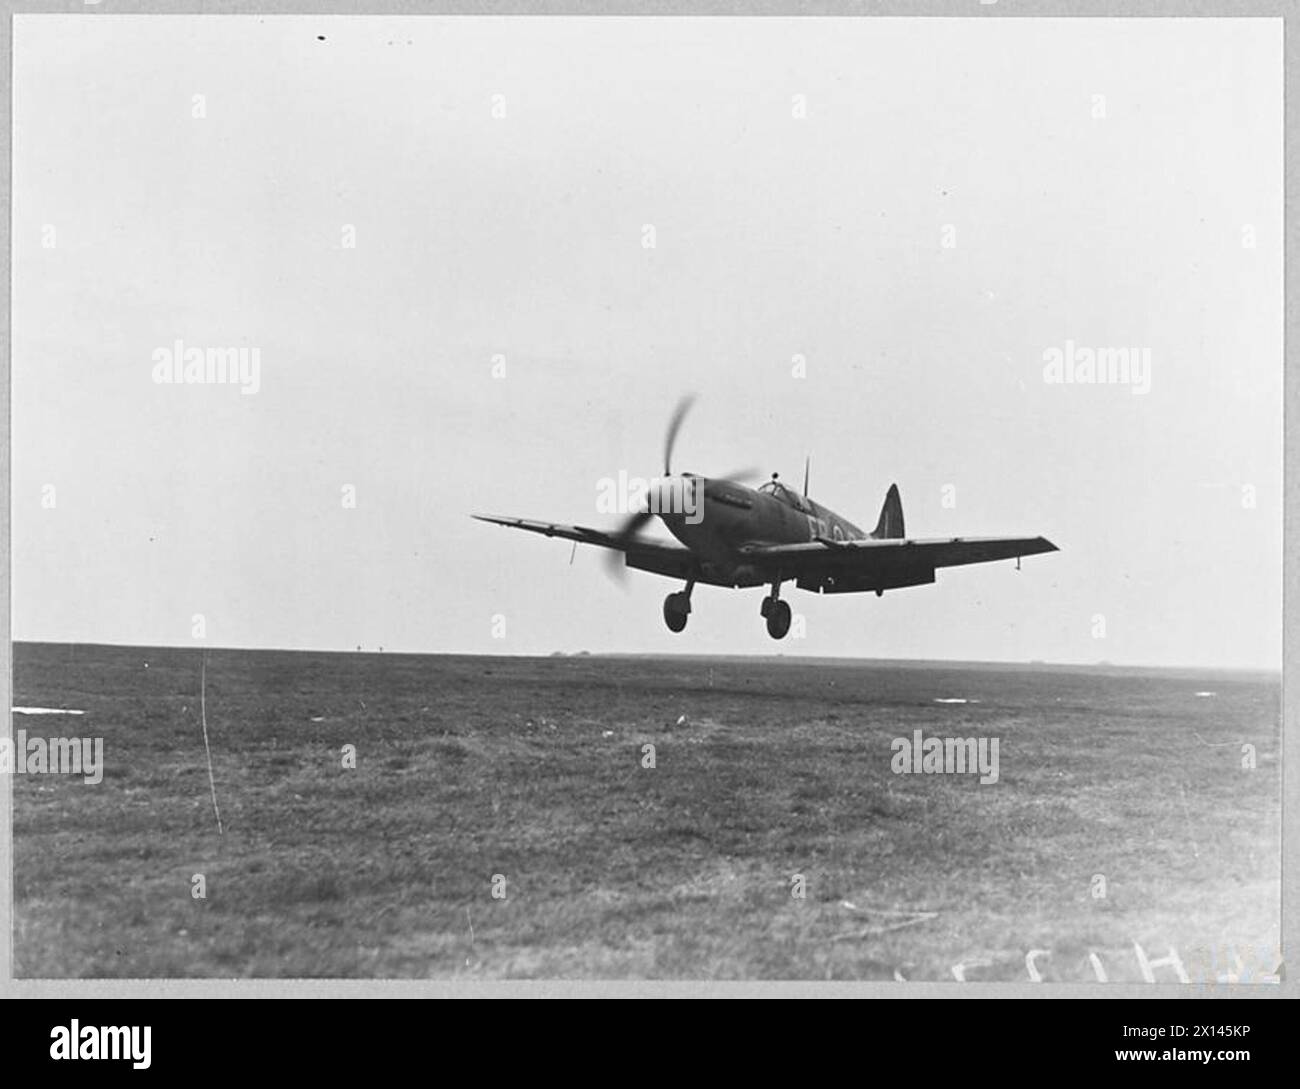 THE LATEST SPITFIRE : MARK XII - 12726 Picture (issued 1944) shows - Coming in to land with wheels and flaps down Royal Air Force Stock Photo